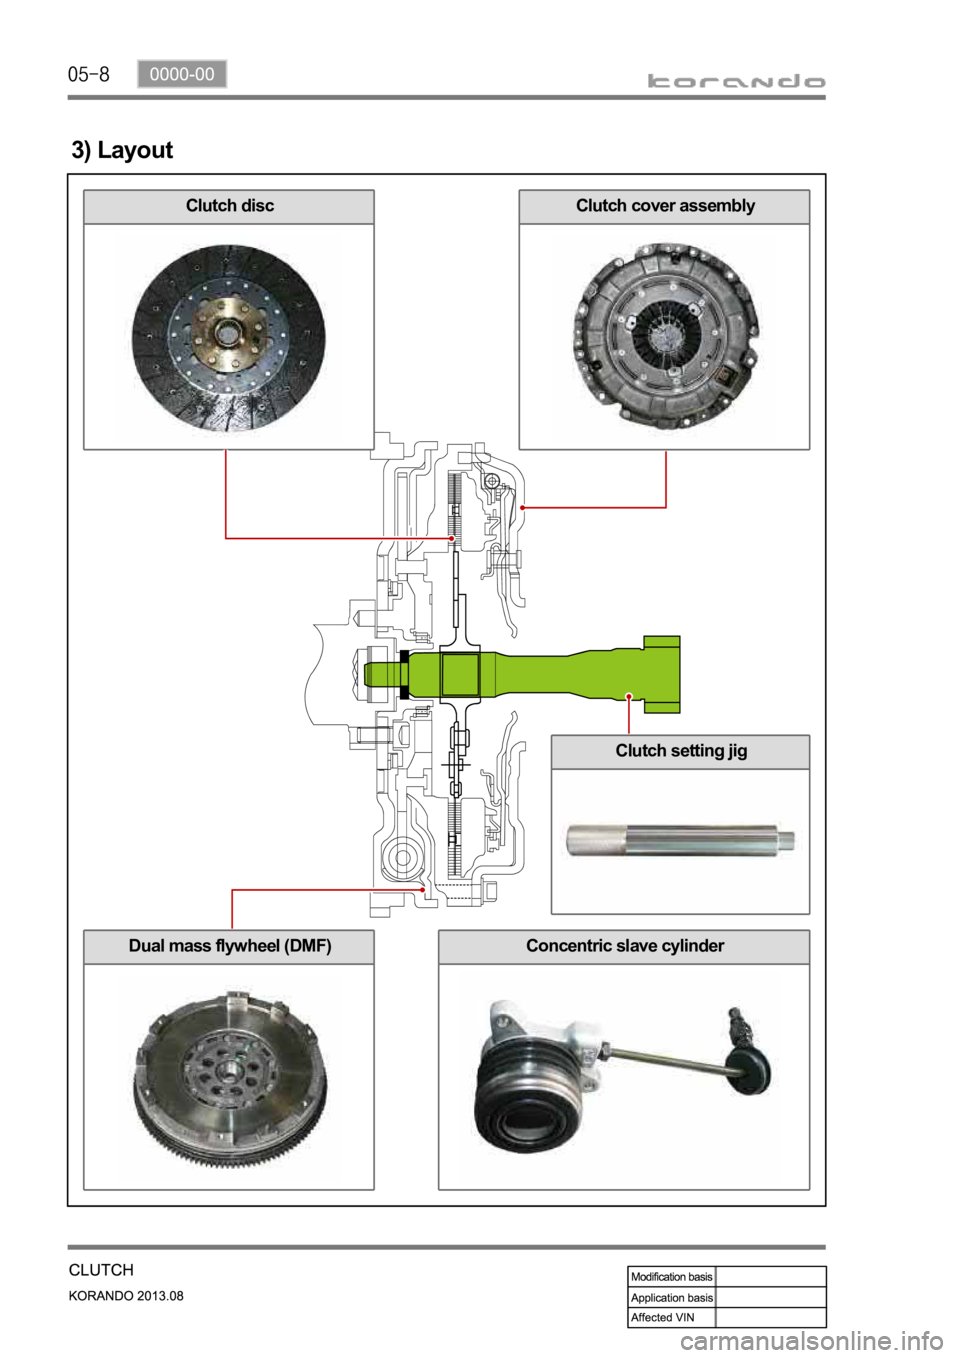 SSANGYONG KORANDO 2013 Owners Guide 3) Layout
Clutch discClutch cover assembly
Concentric slave cylinderDual mass flywheel (DMF)
Clutch setting jig 